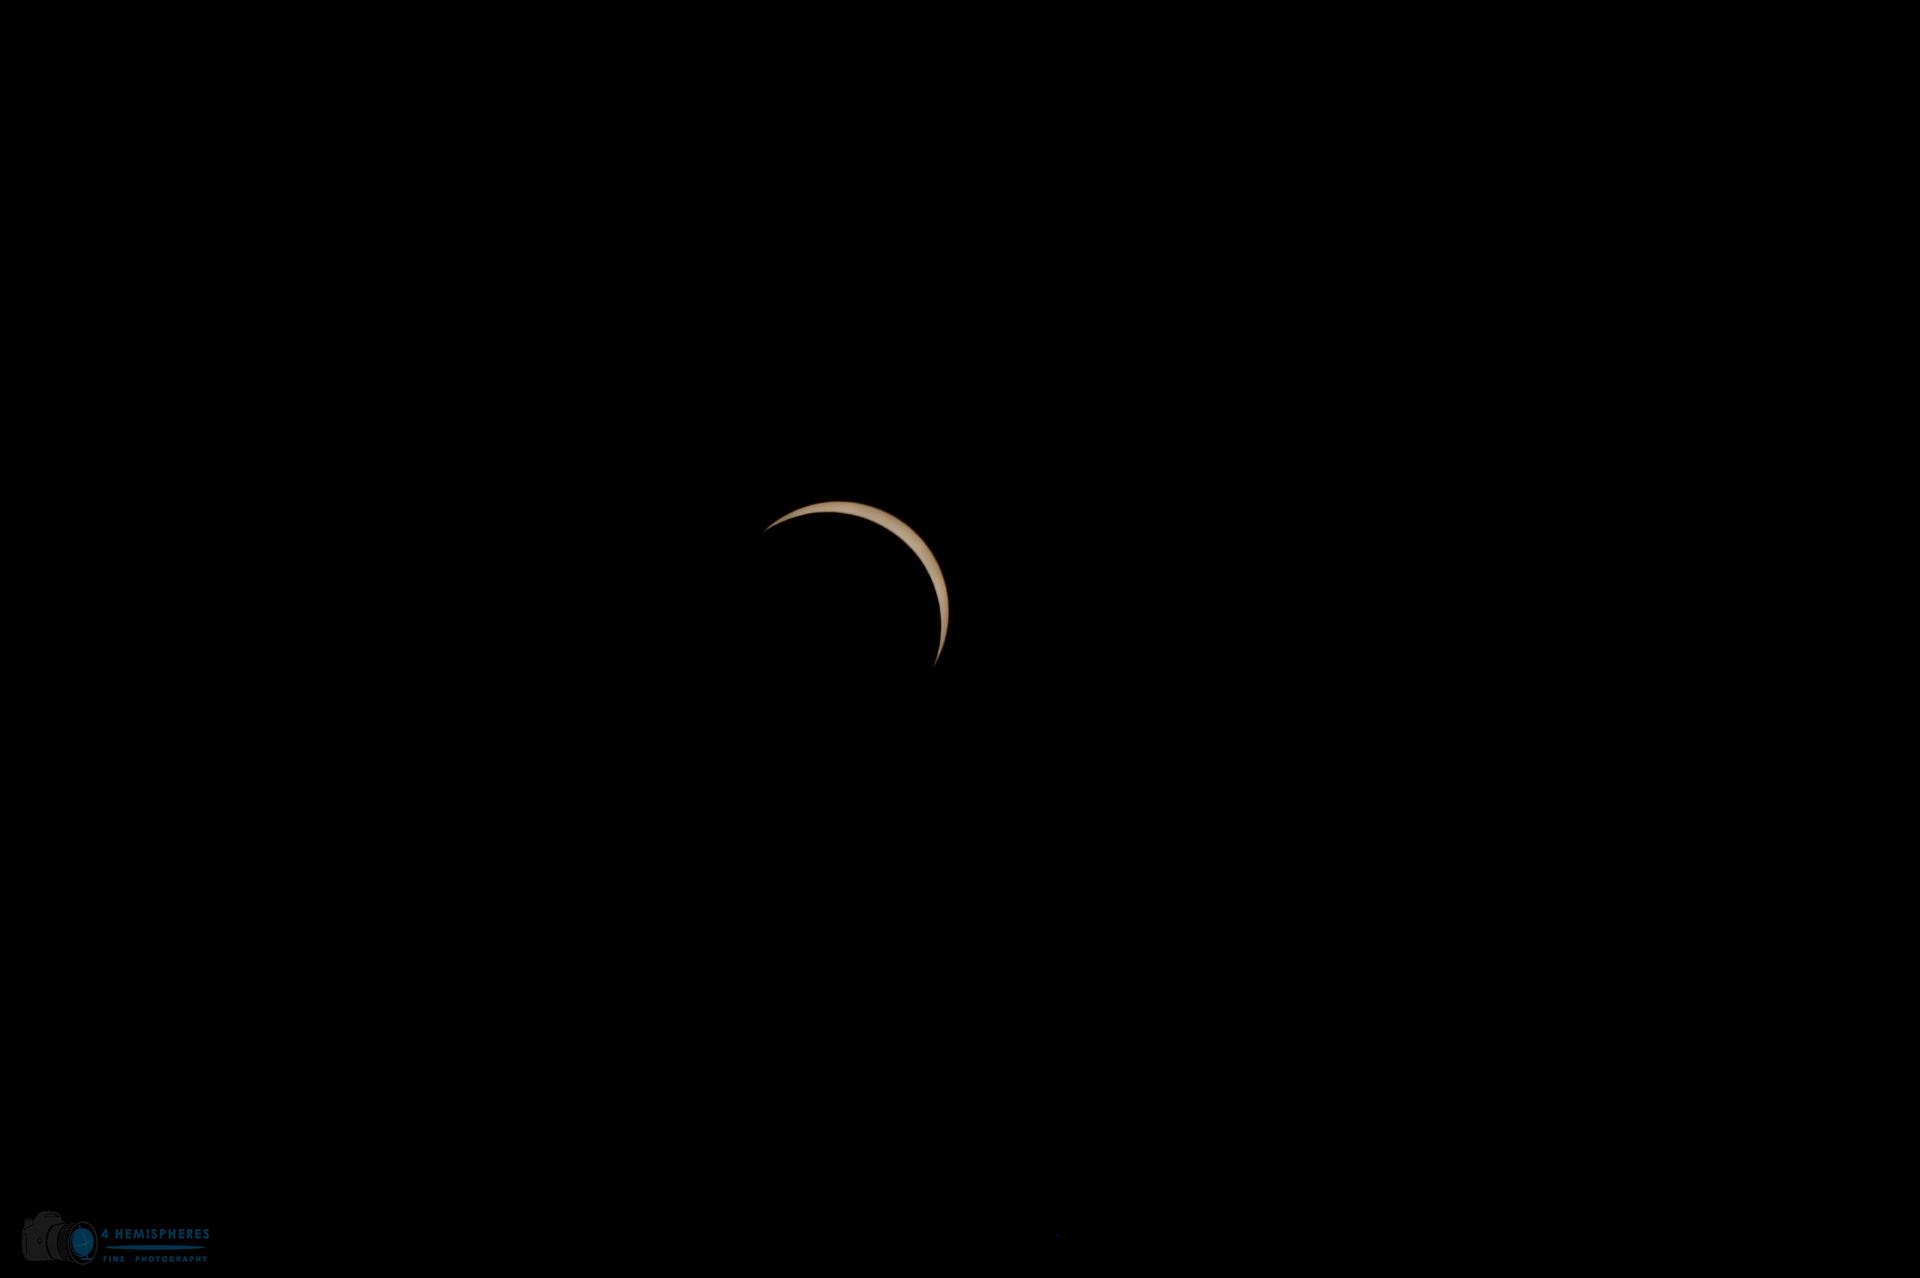 Last Crescent Sun continues to come out of total coverage by moon. by 4 Hemispheres Photography